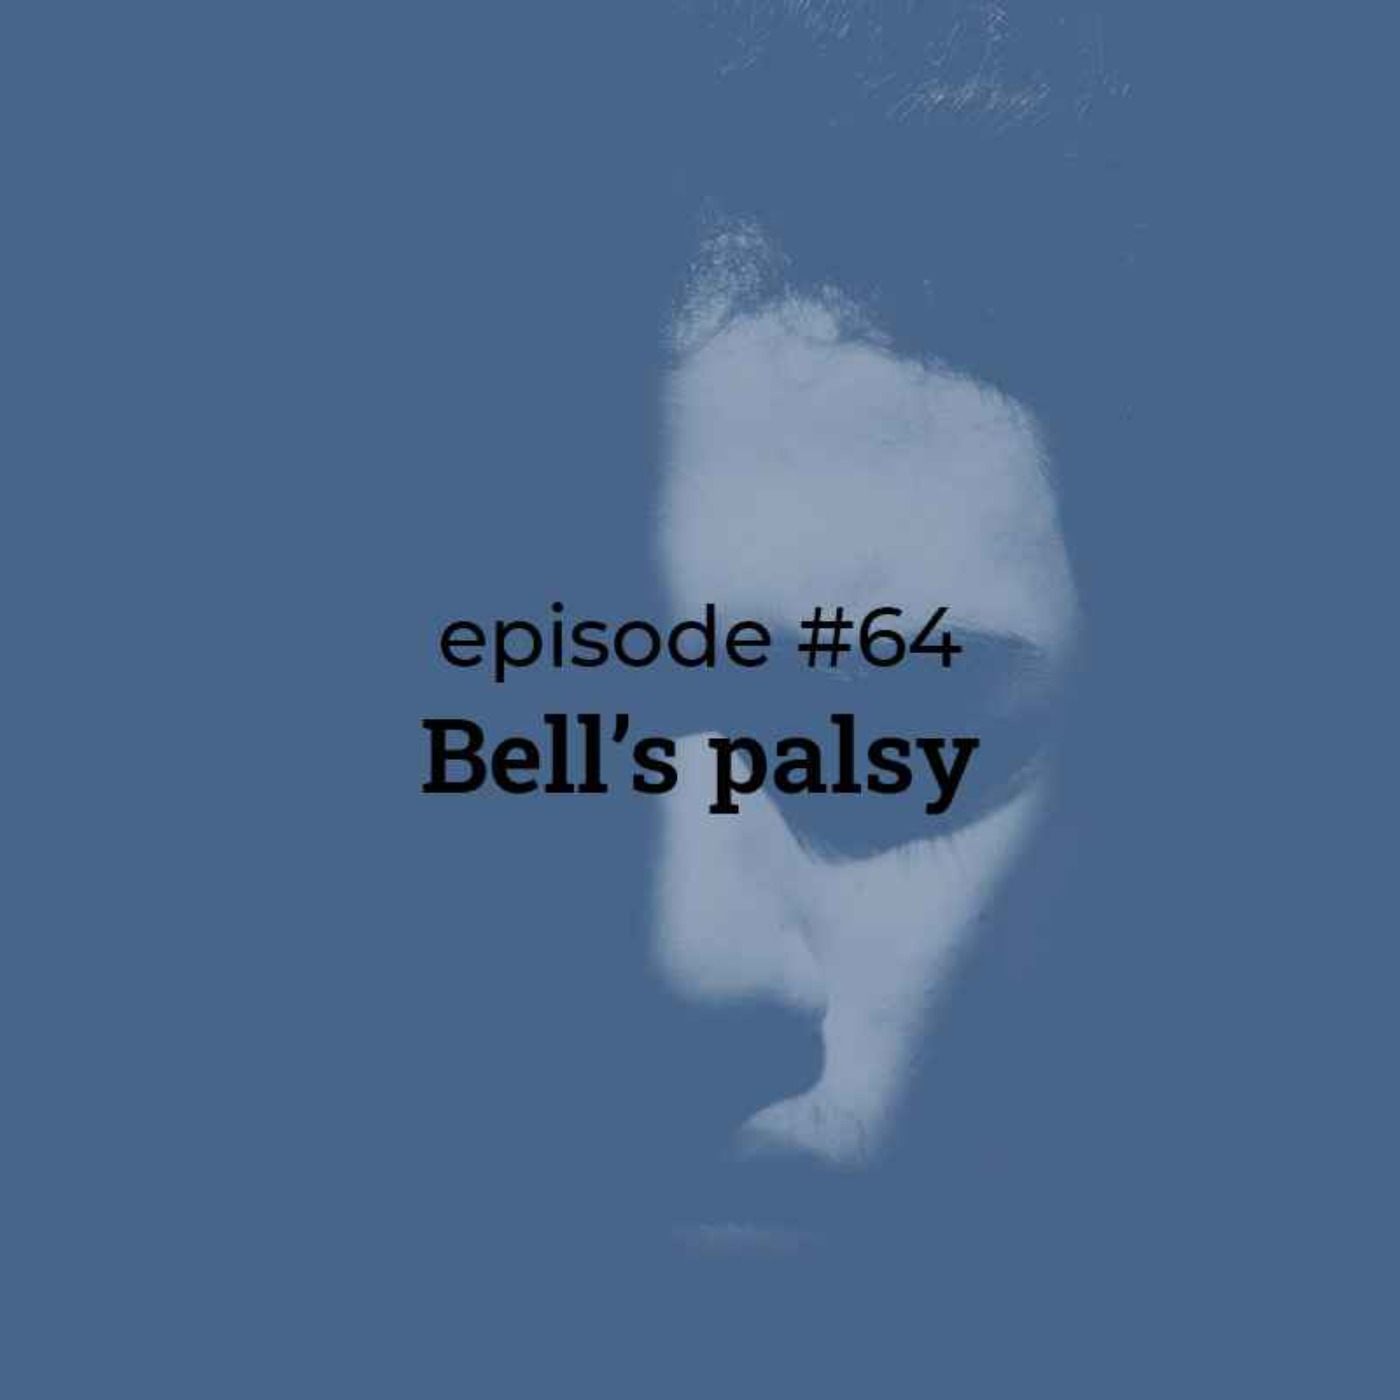 #64 Bell’s palsy